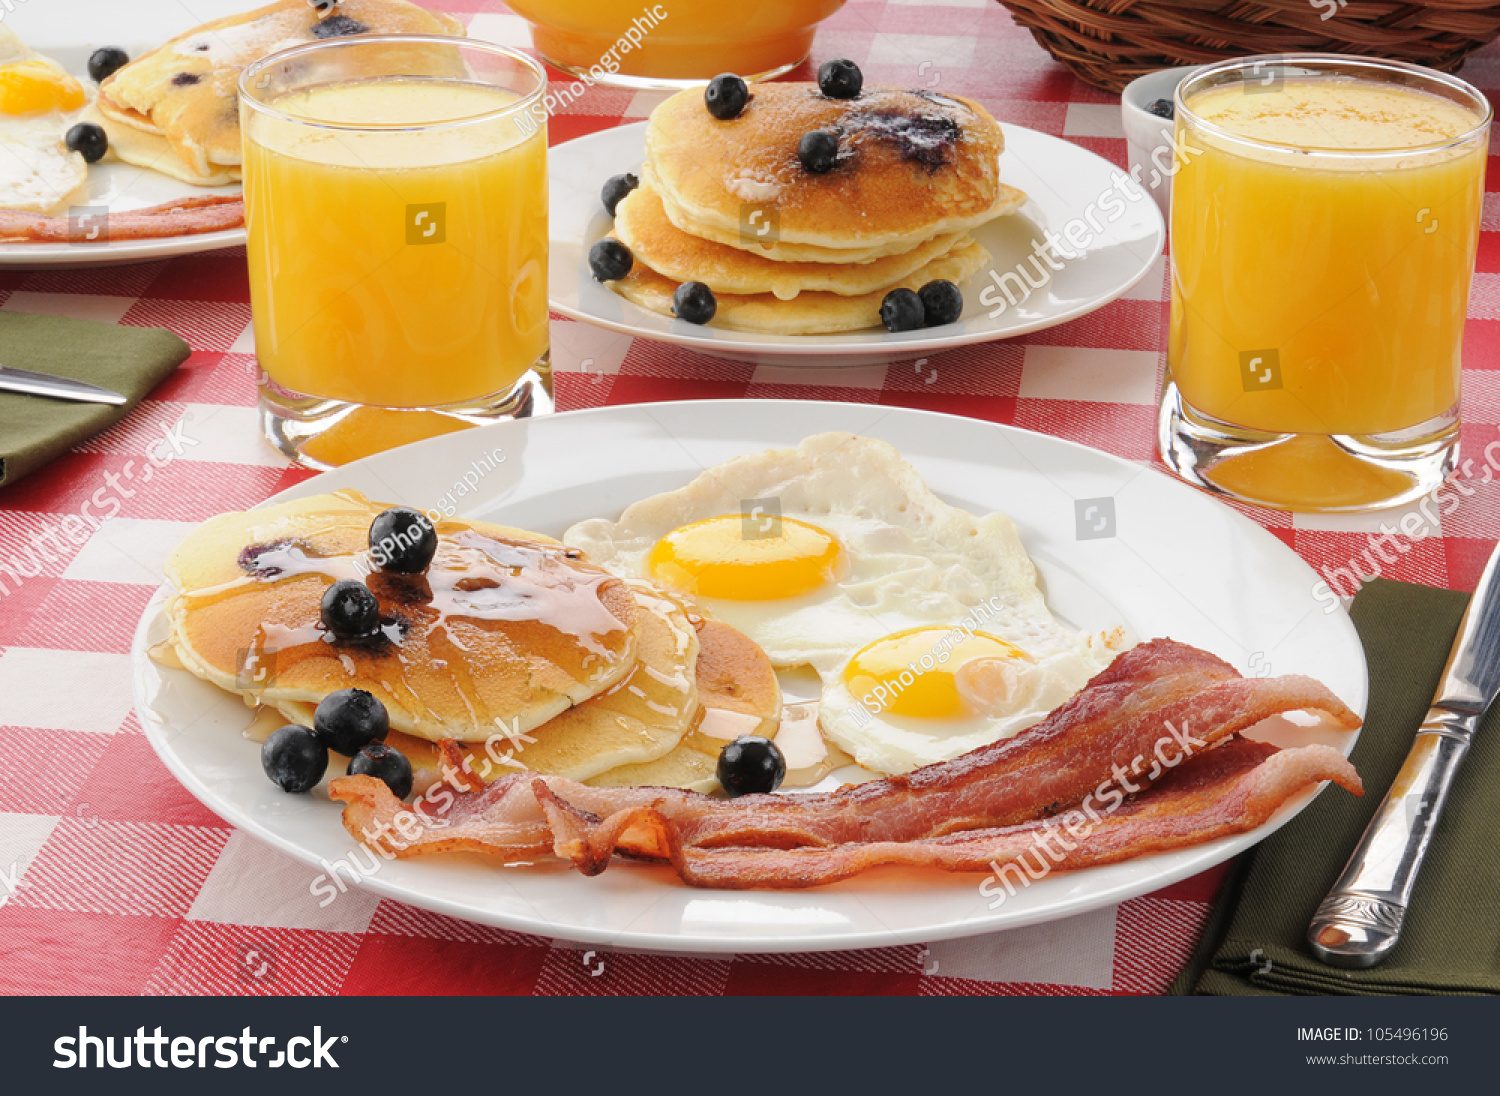 A Breakfast With Bacon And Fried Eggs With Blueberry Pancakes And ...